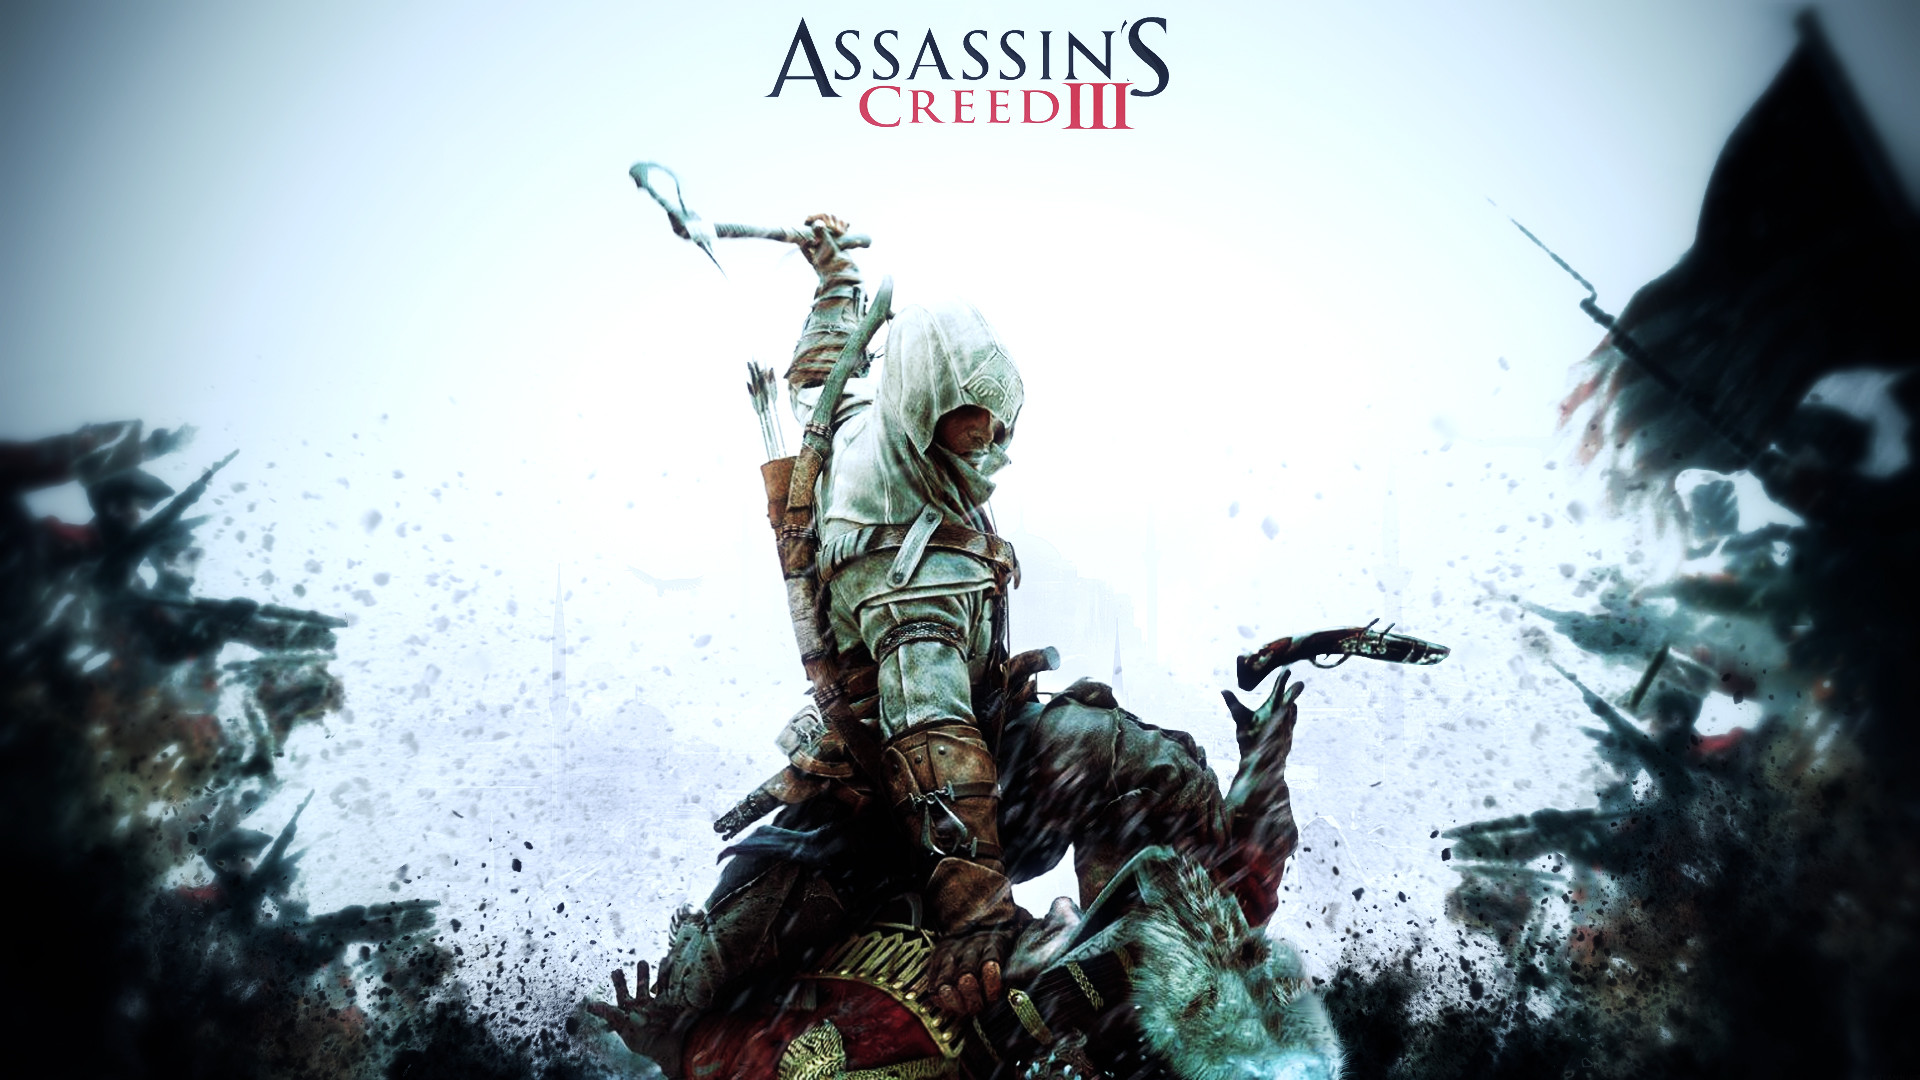 1920x1080 assassin's creed 3 - Google Search